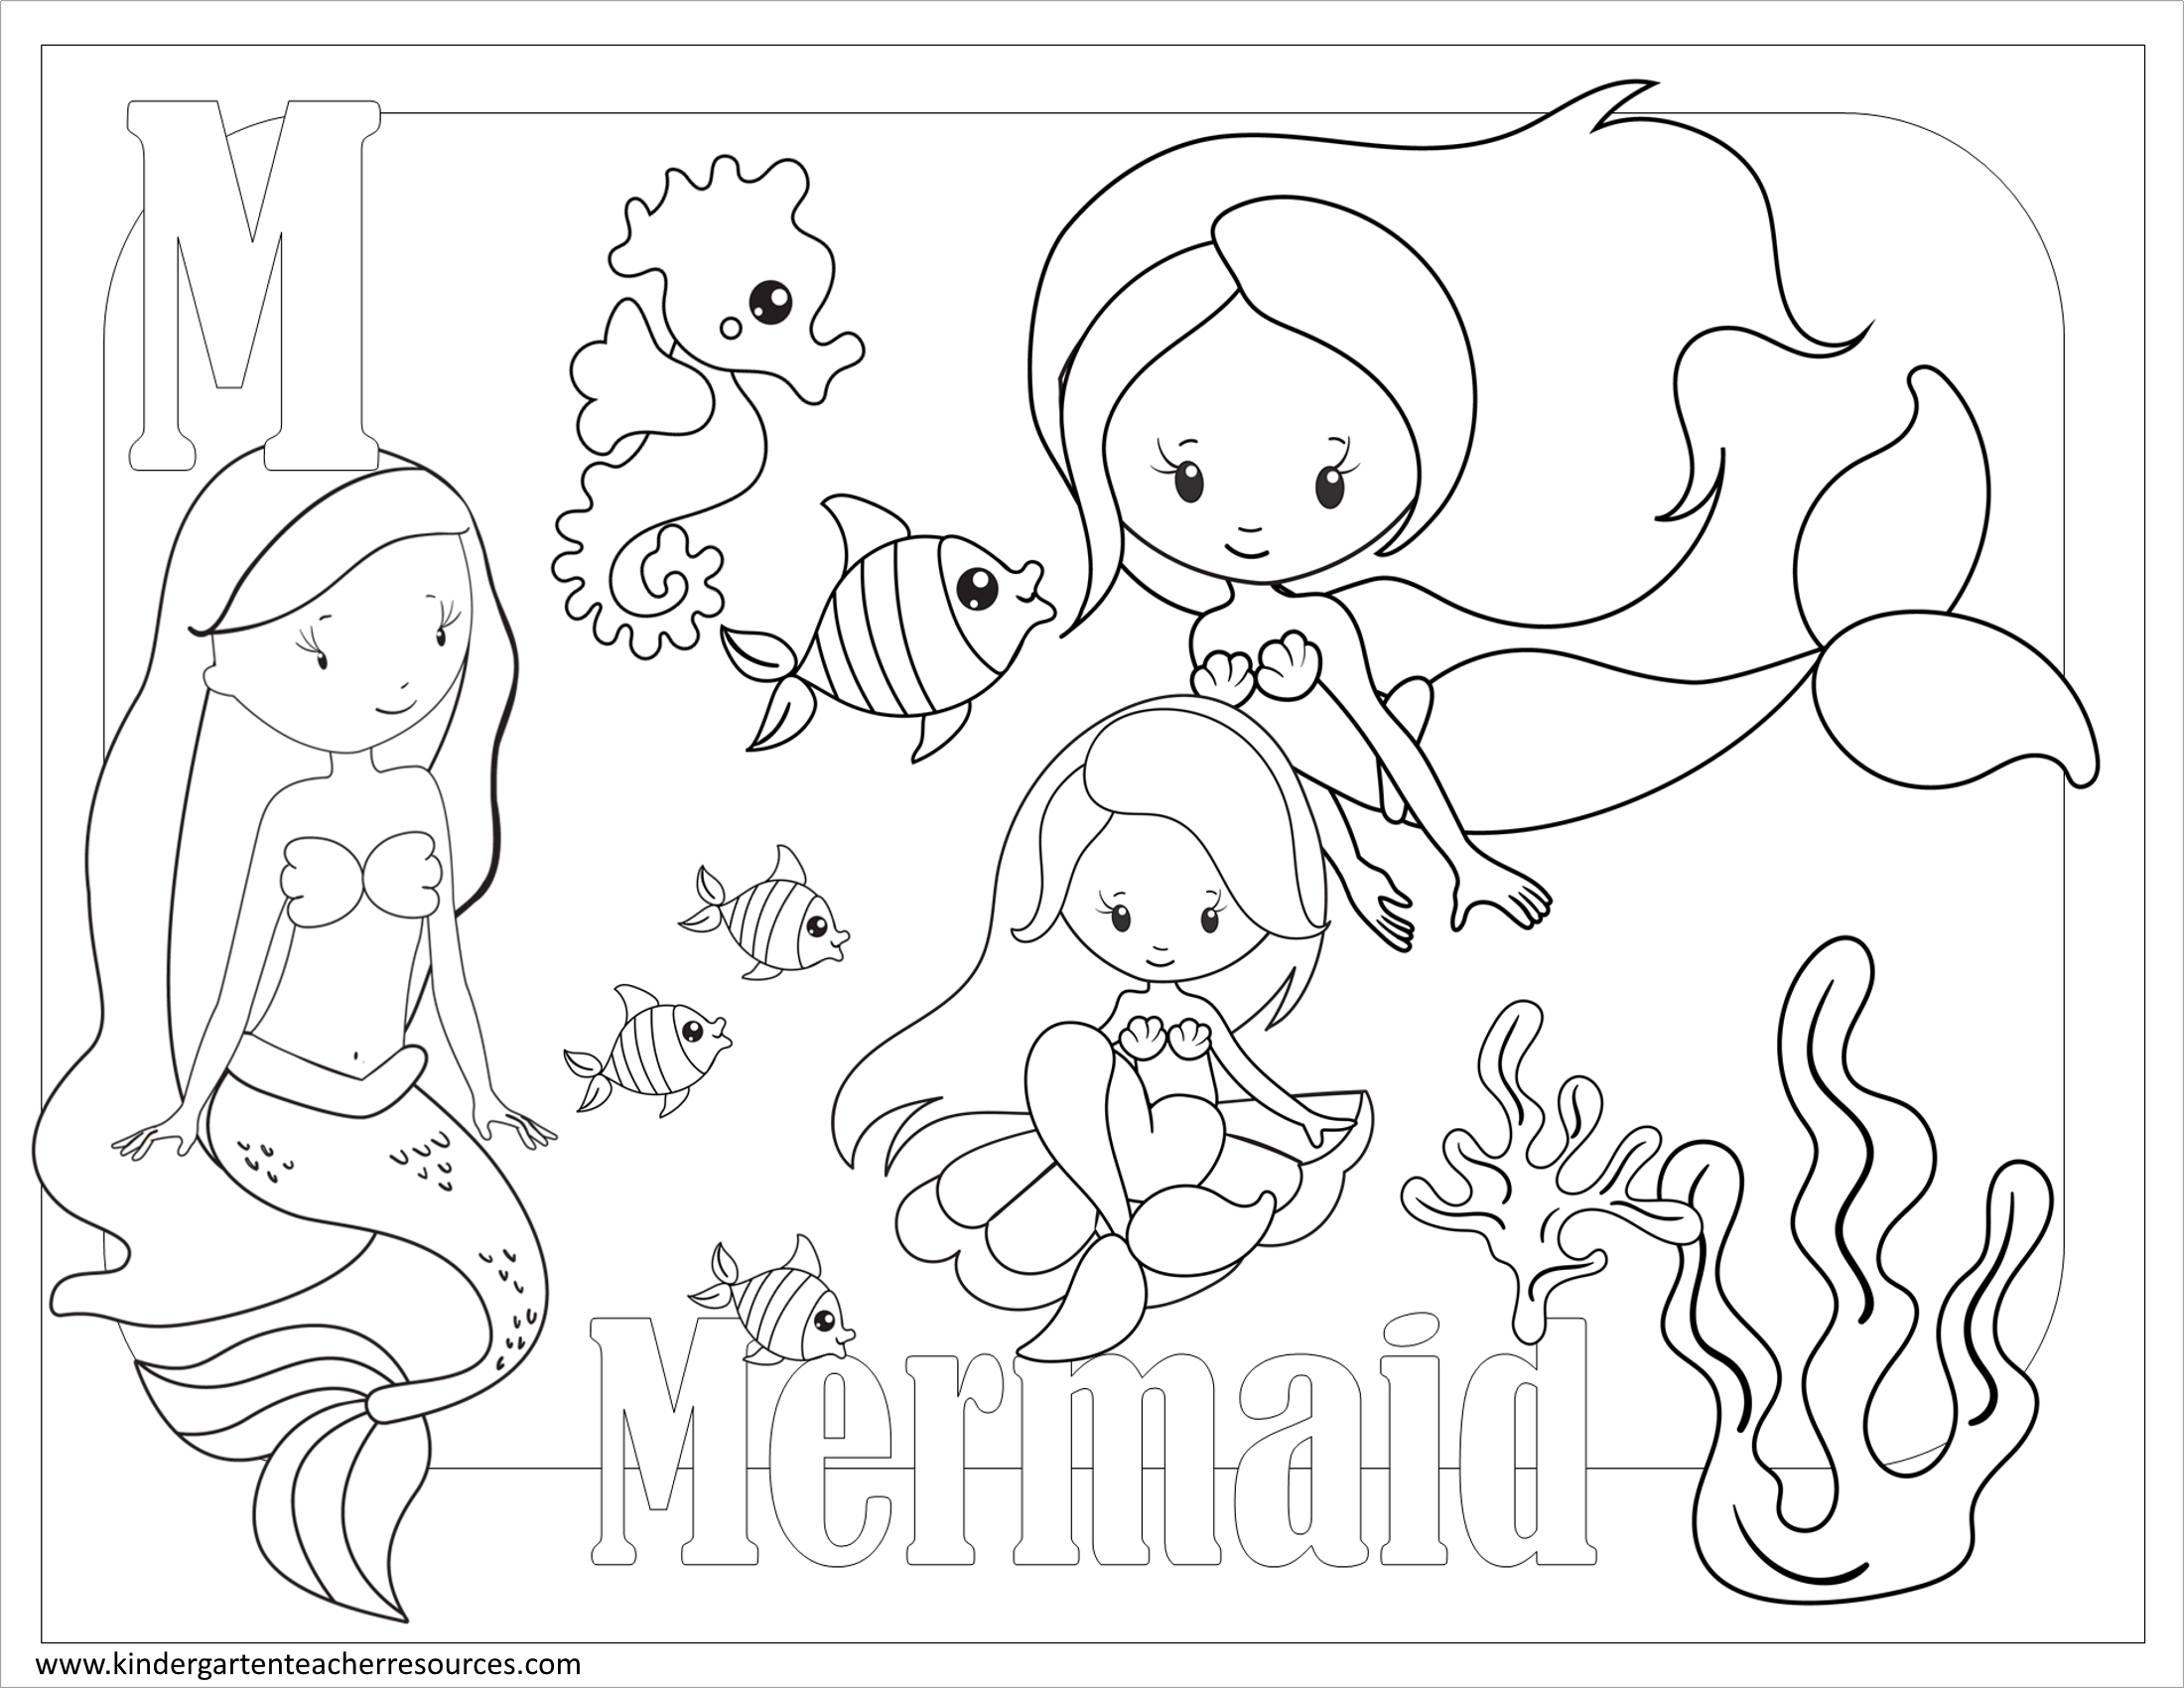 free-printable-coloring-pages-for-kindergarten